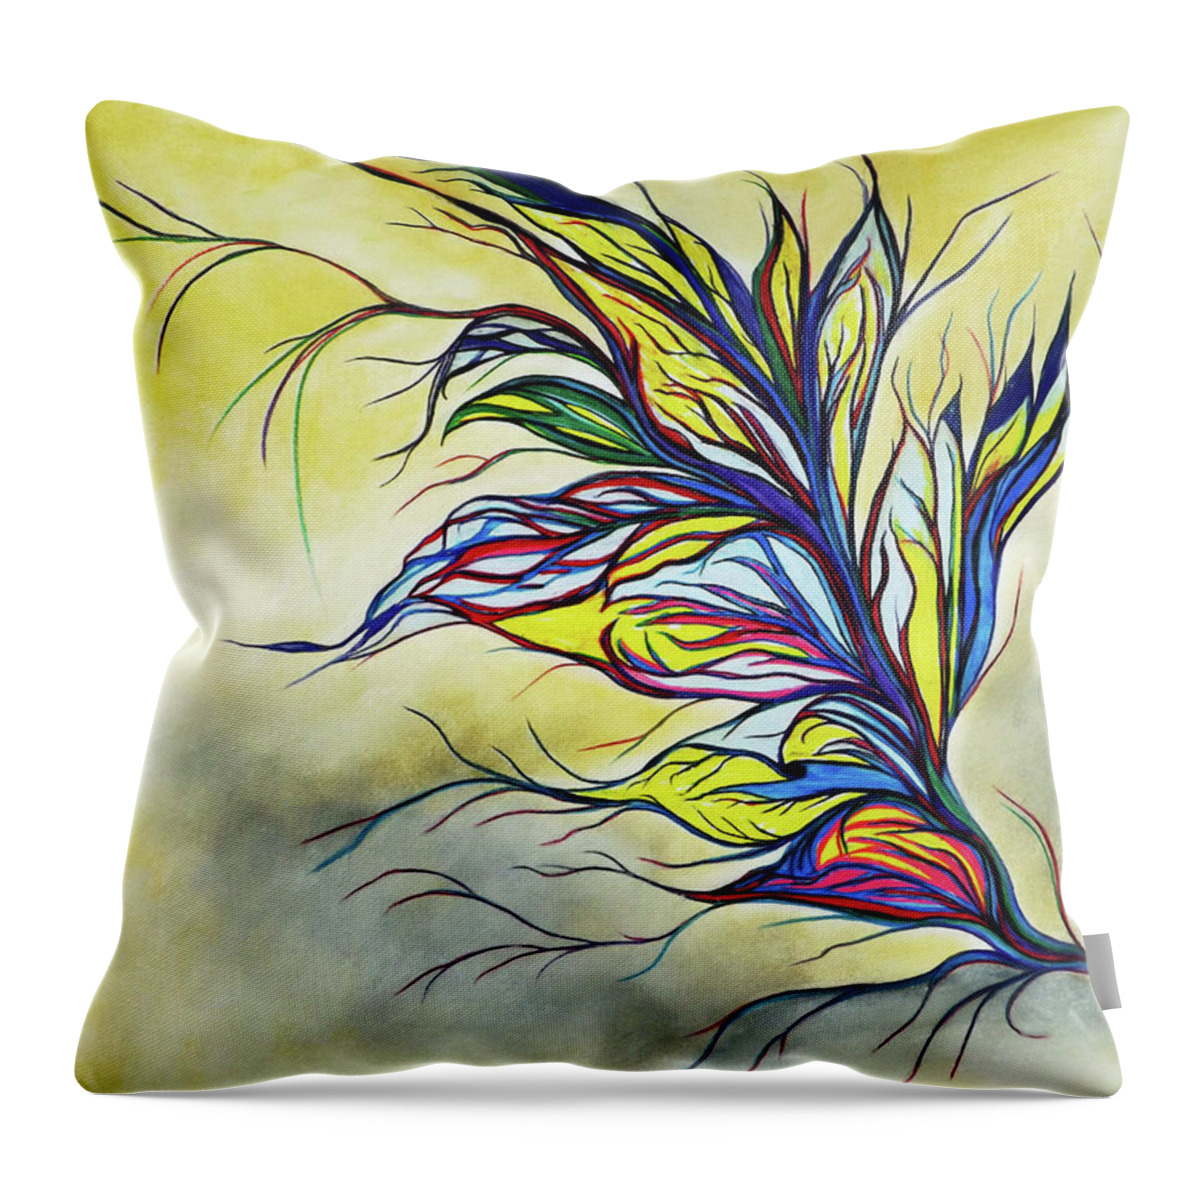 Flower Throw Pillow featuring the mixed media Flower Plant by Melinda Firestone-White